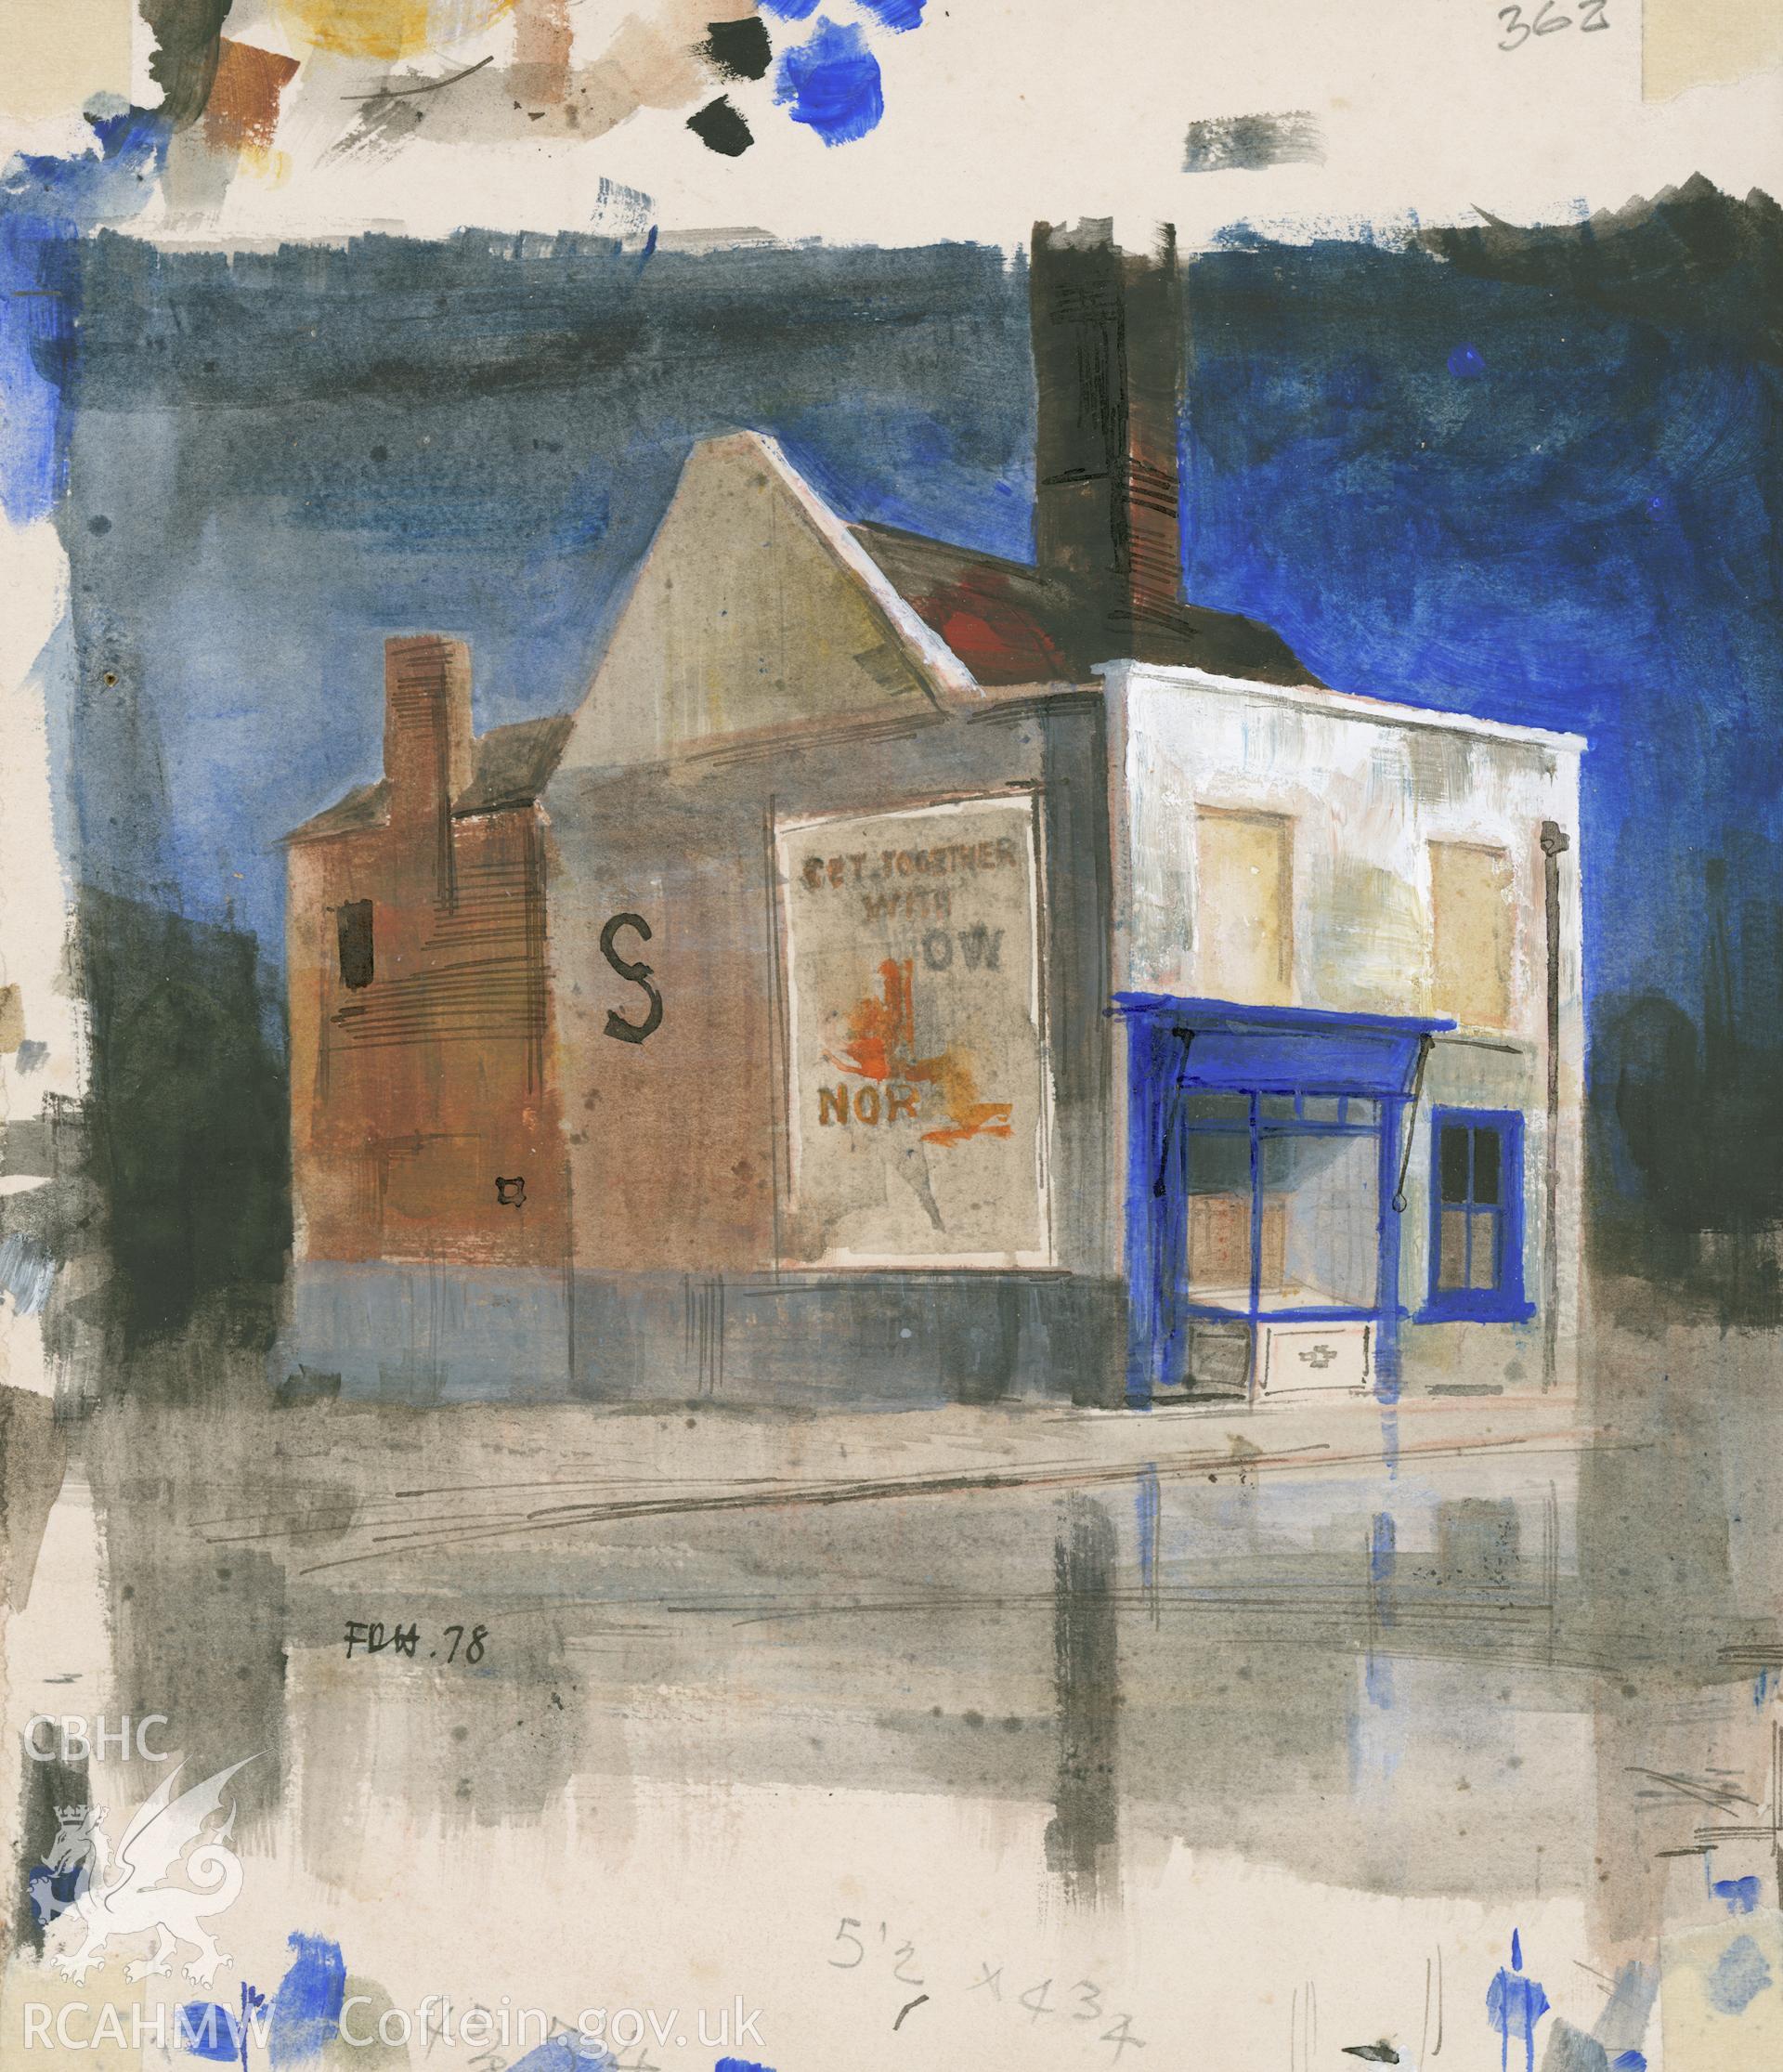 Park Street Shop, Coventry: (acrylic) drawing.